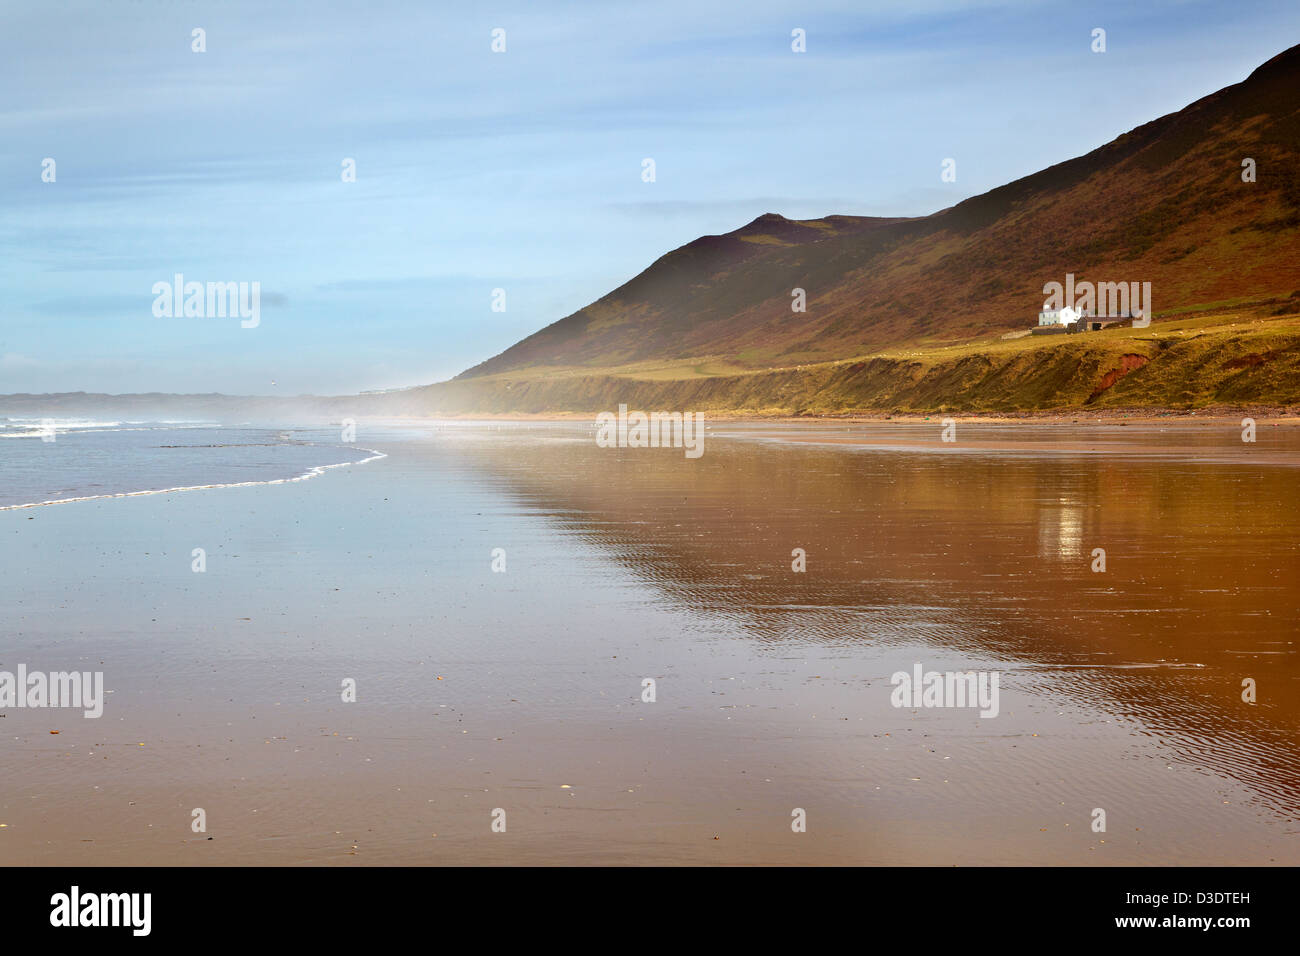 Rhossili Bay, Gower Peninsula, South West Wales. Stock Photo